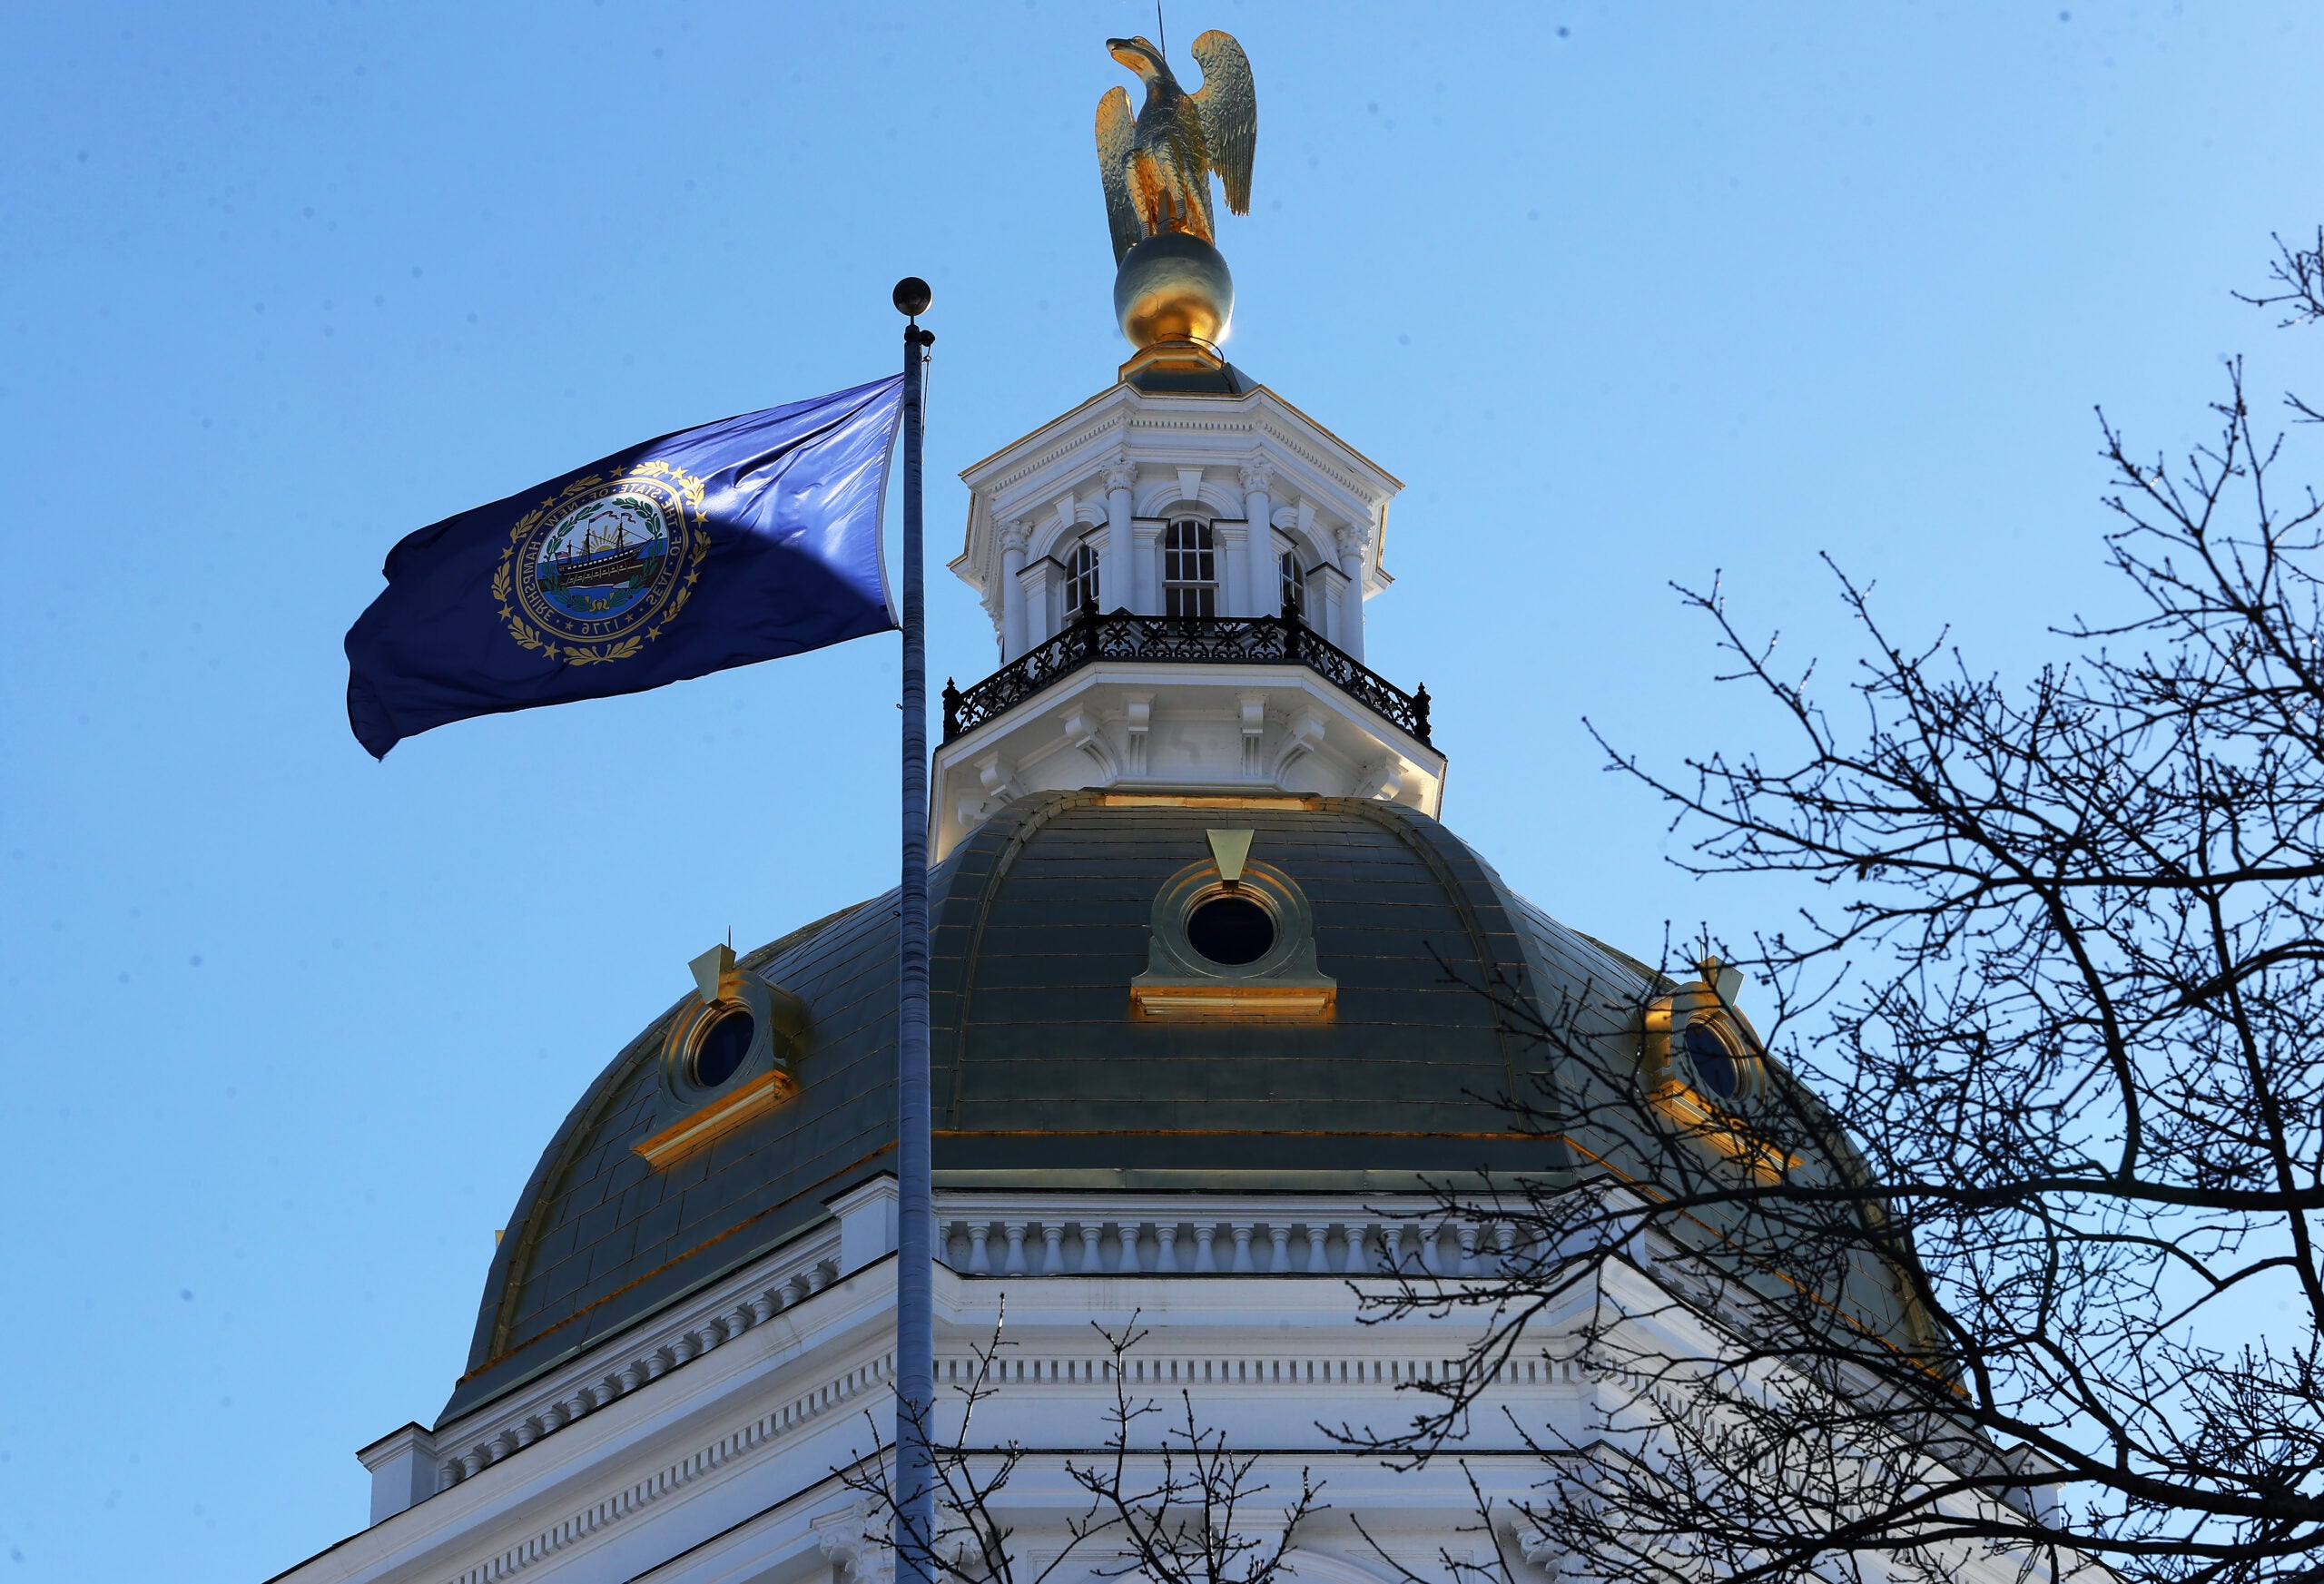 The dome of the New Hampshire State House.